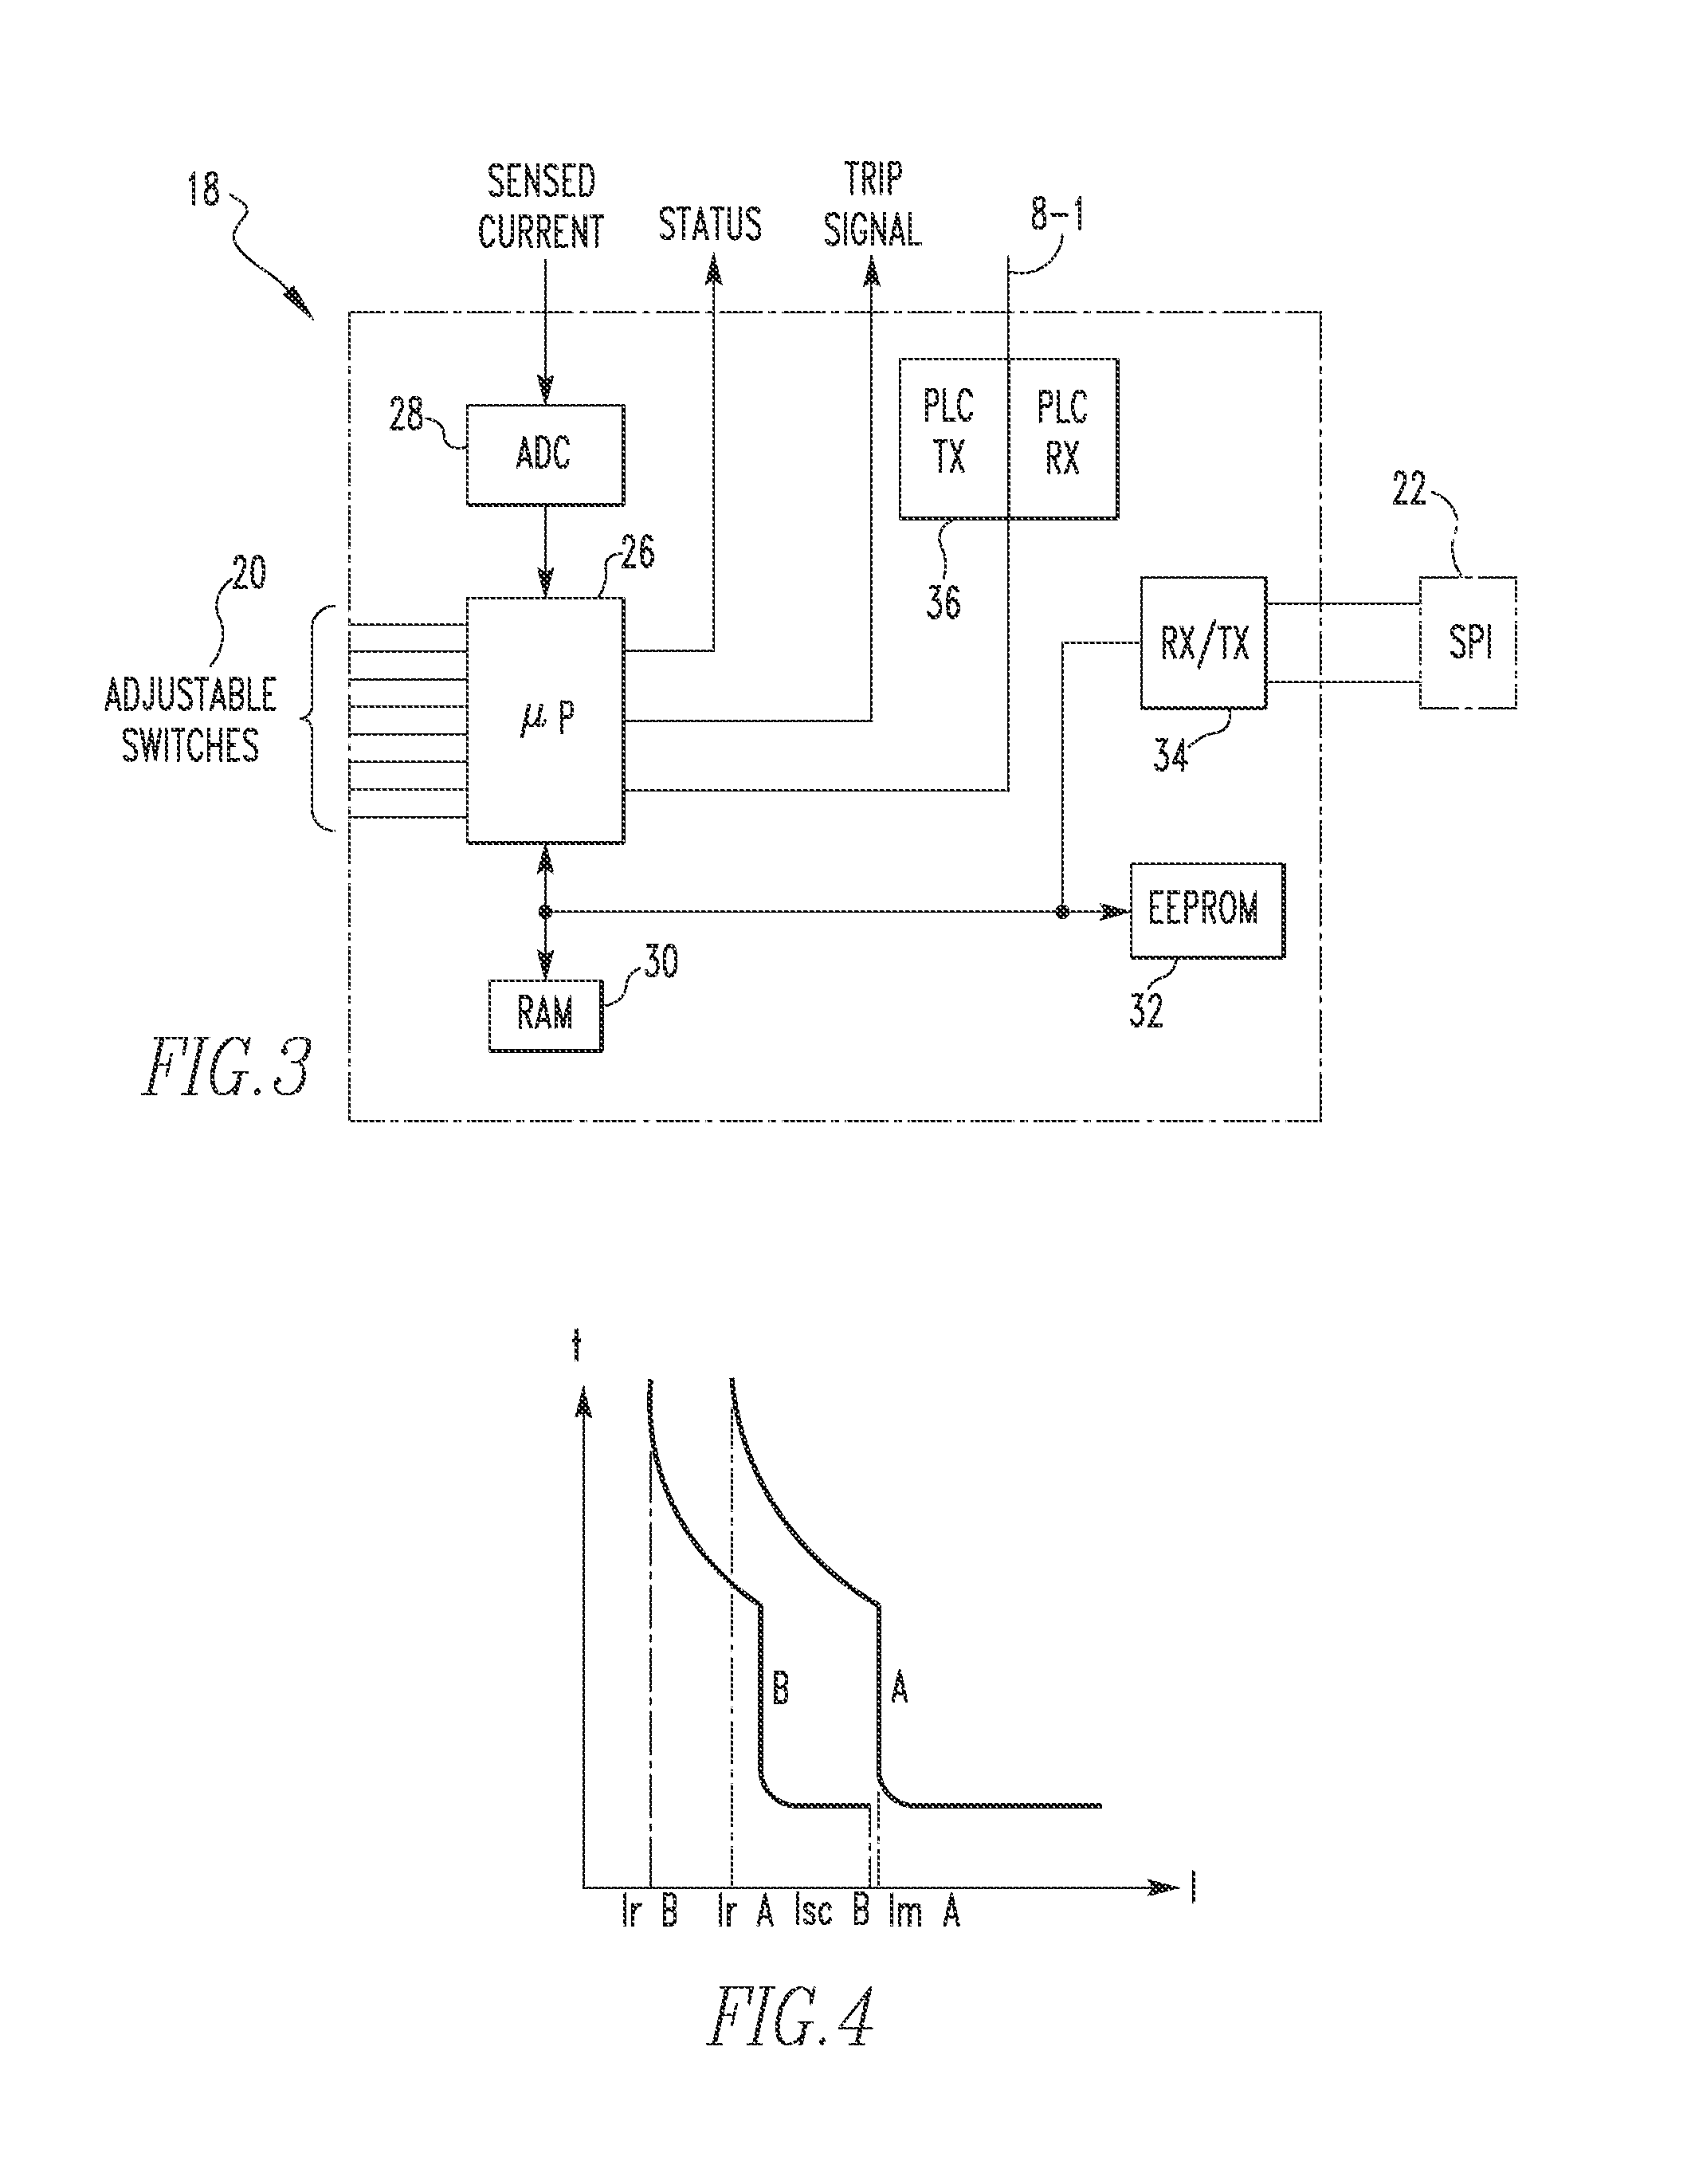 System and method for adjusting the trip characteristics of a circuit breaker